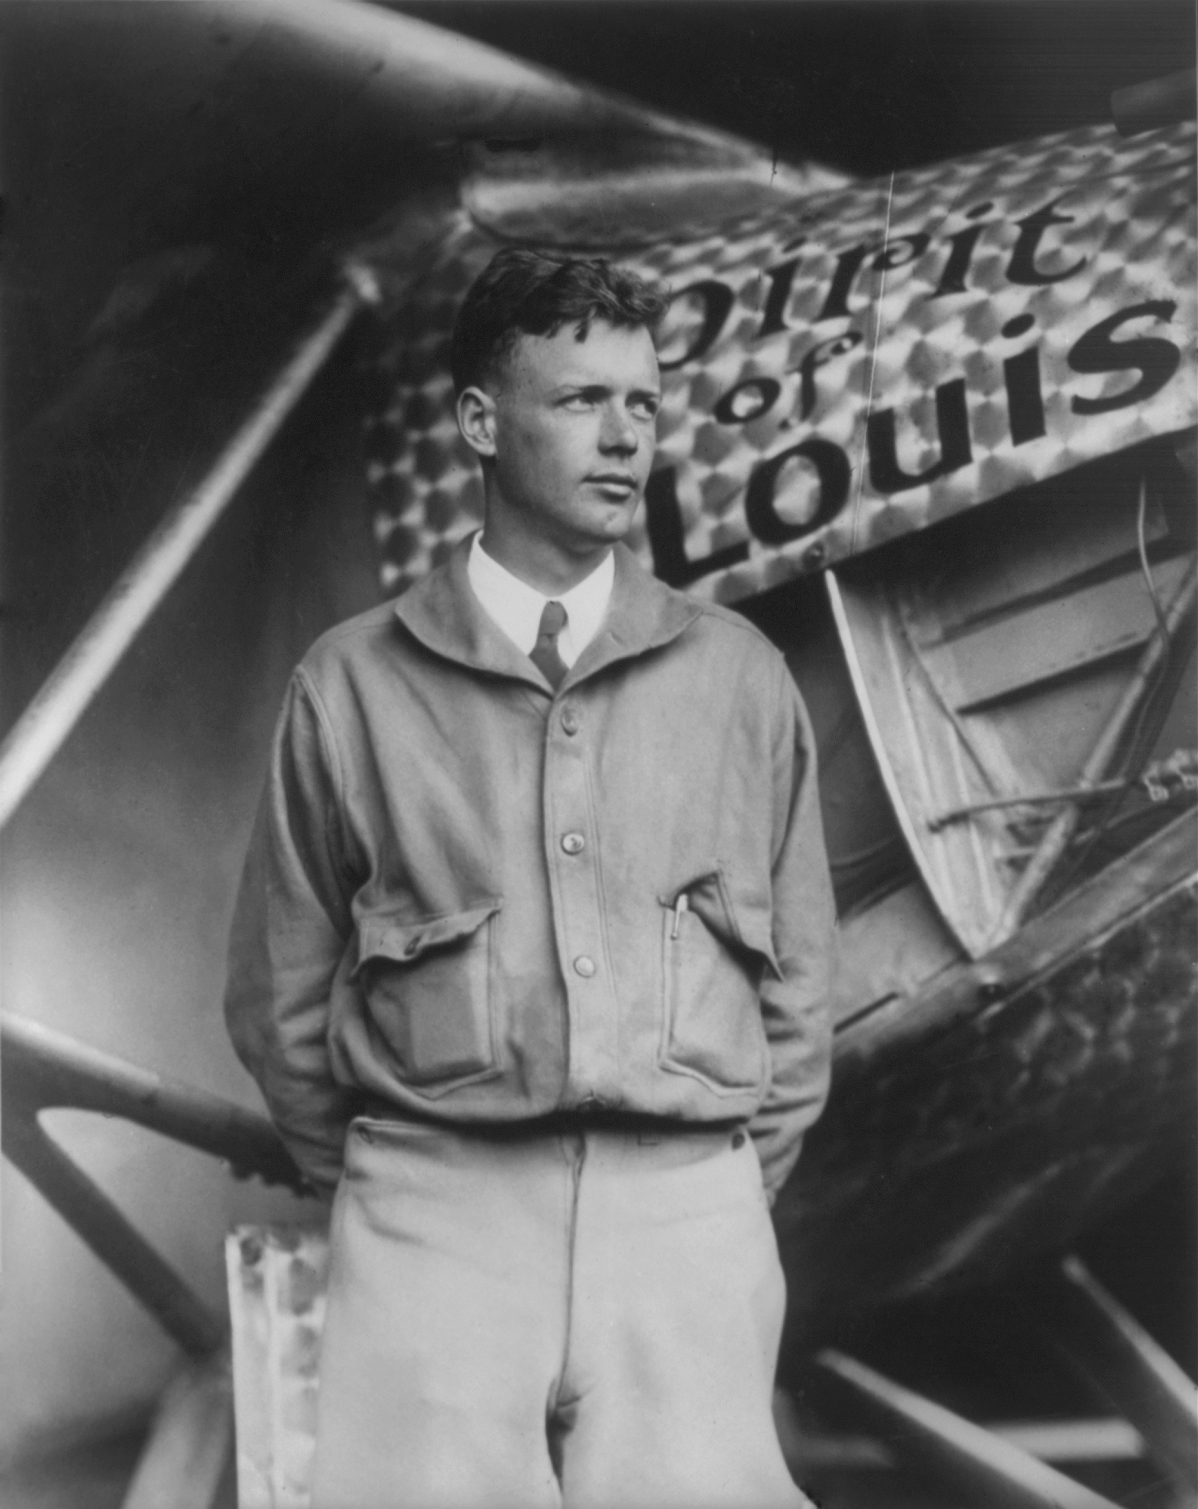 Charles Lindbergh, with Spirit of St. Louis in background. Restored by Crisco 1492 from File:Charles Lindbergh and the Spirit of Saint Louis.tif (removed dust, scratches, including black spots on the wings which may or may not have been there in the original).